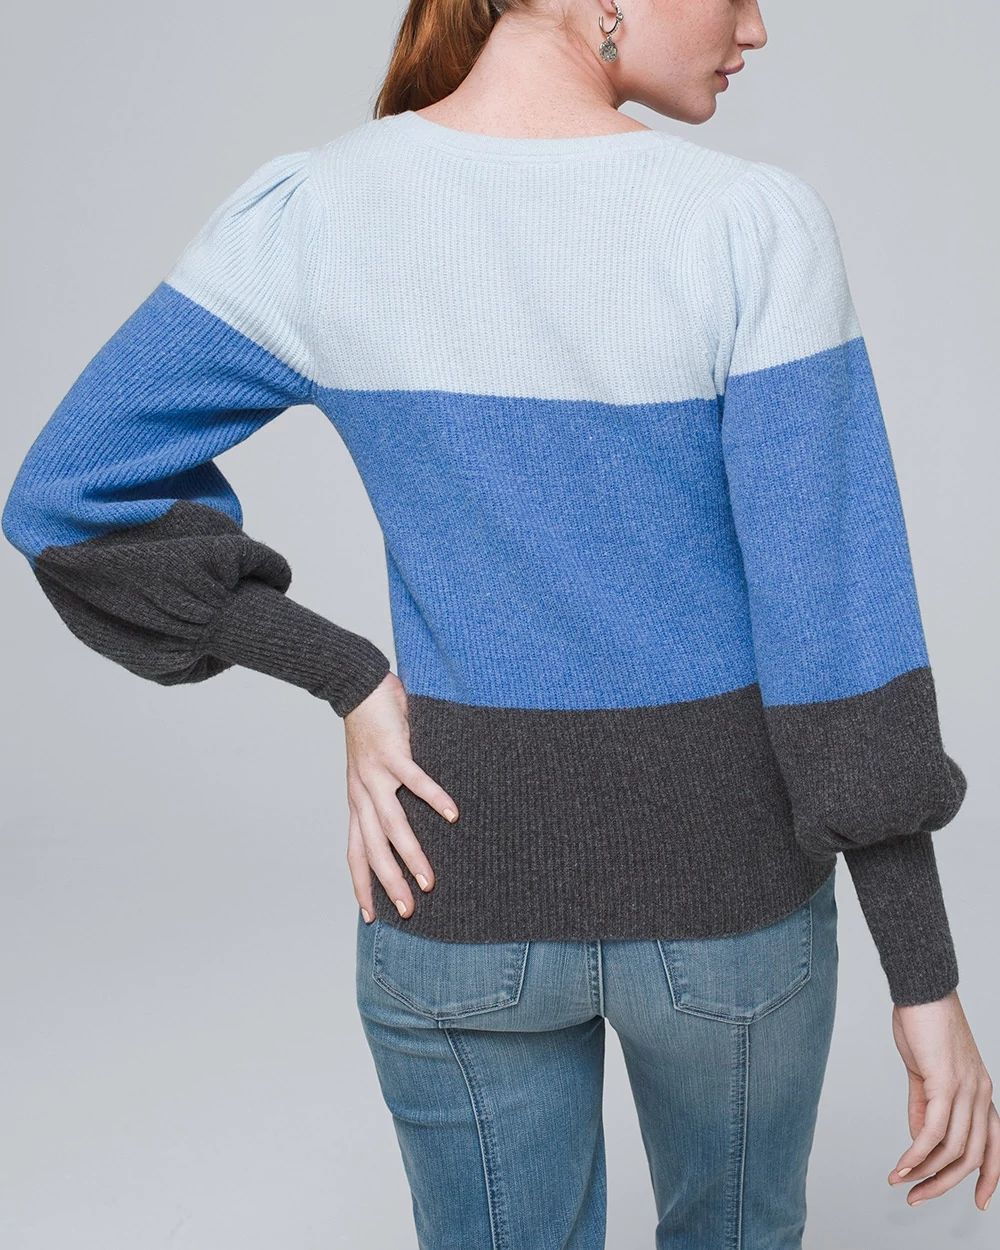 Blouson Sleeve Colorblock Pullover click to view larger image.